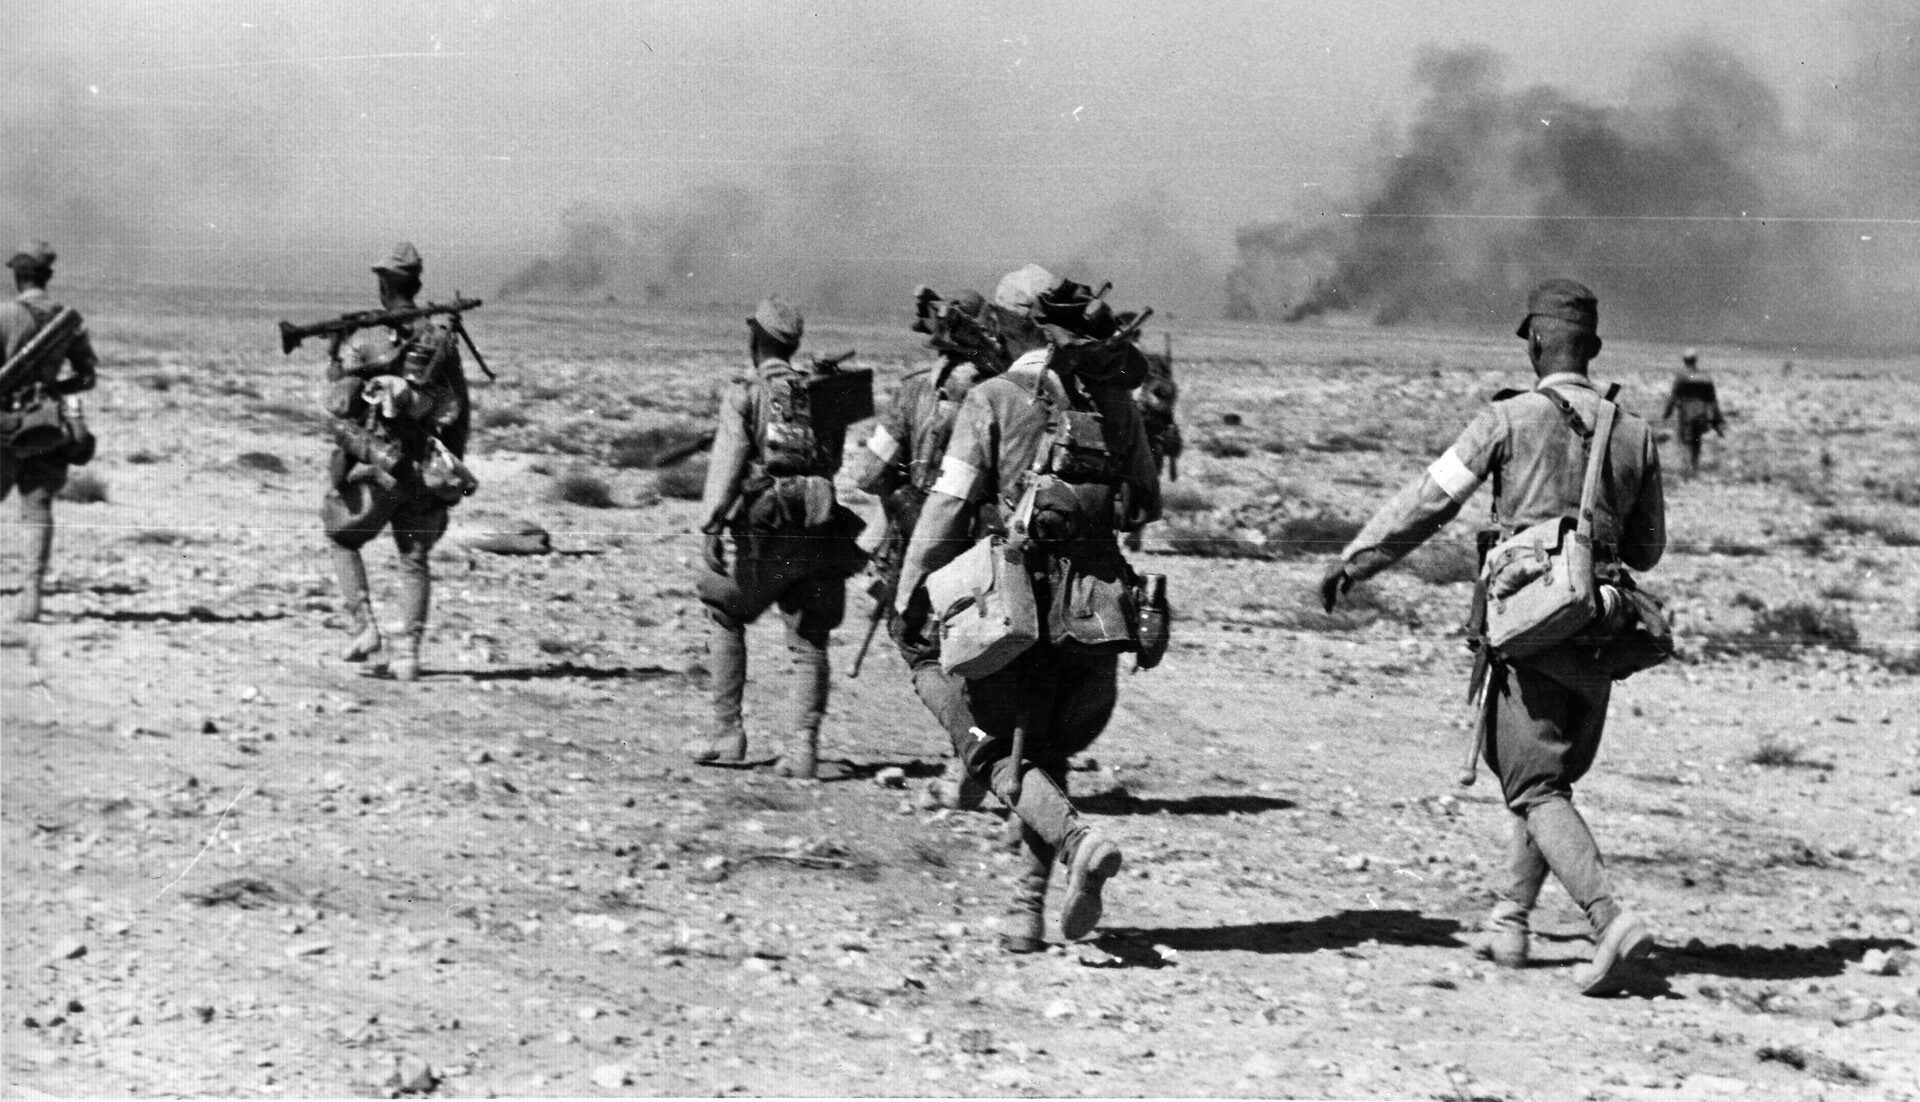 Axis troops march across a bleak North African landscape. Searing heat, freezing cold, biting flies, and a lack of cover and concealment made fighting in the forbidding terrain a hell for both armies.